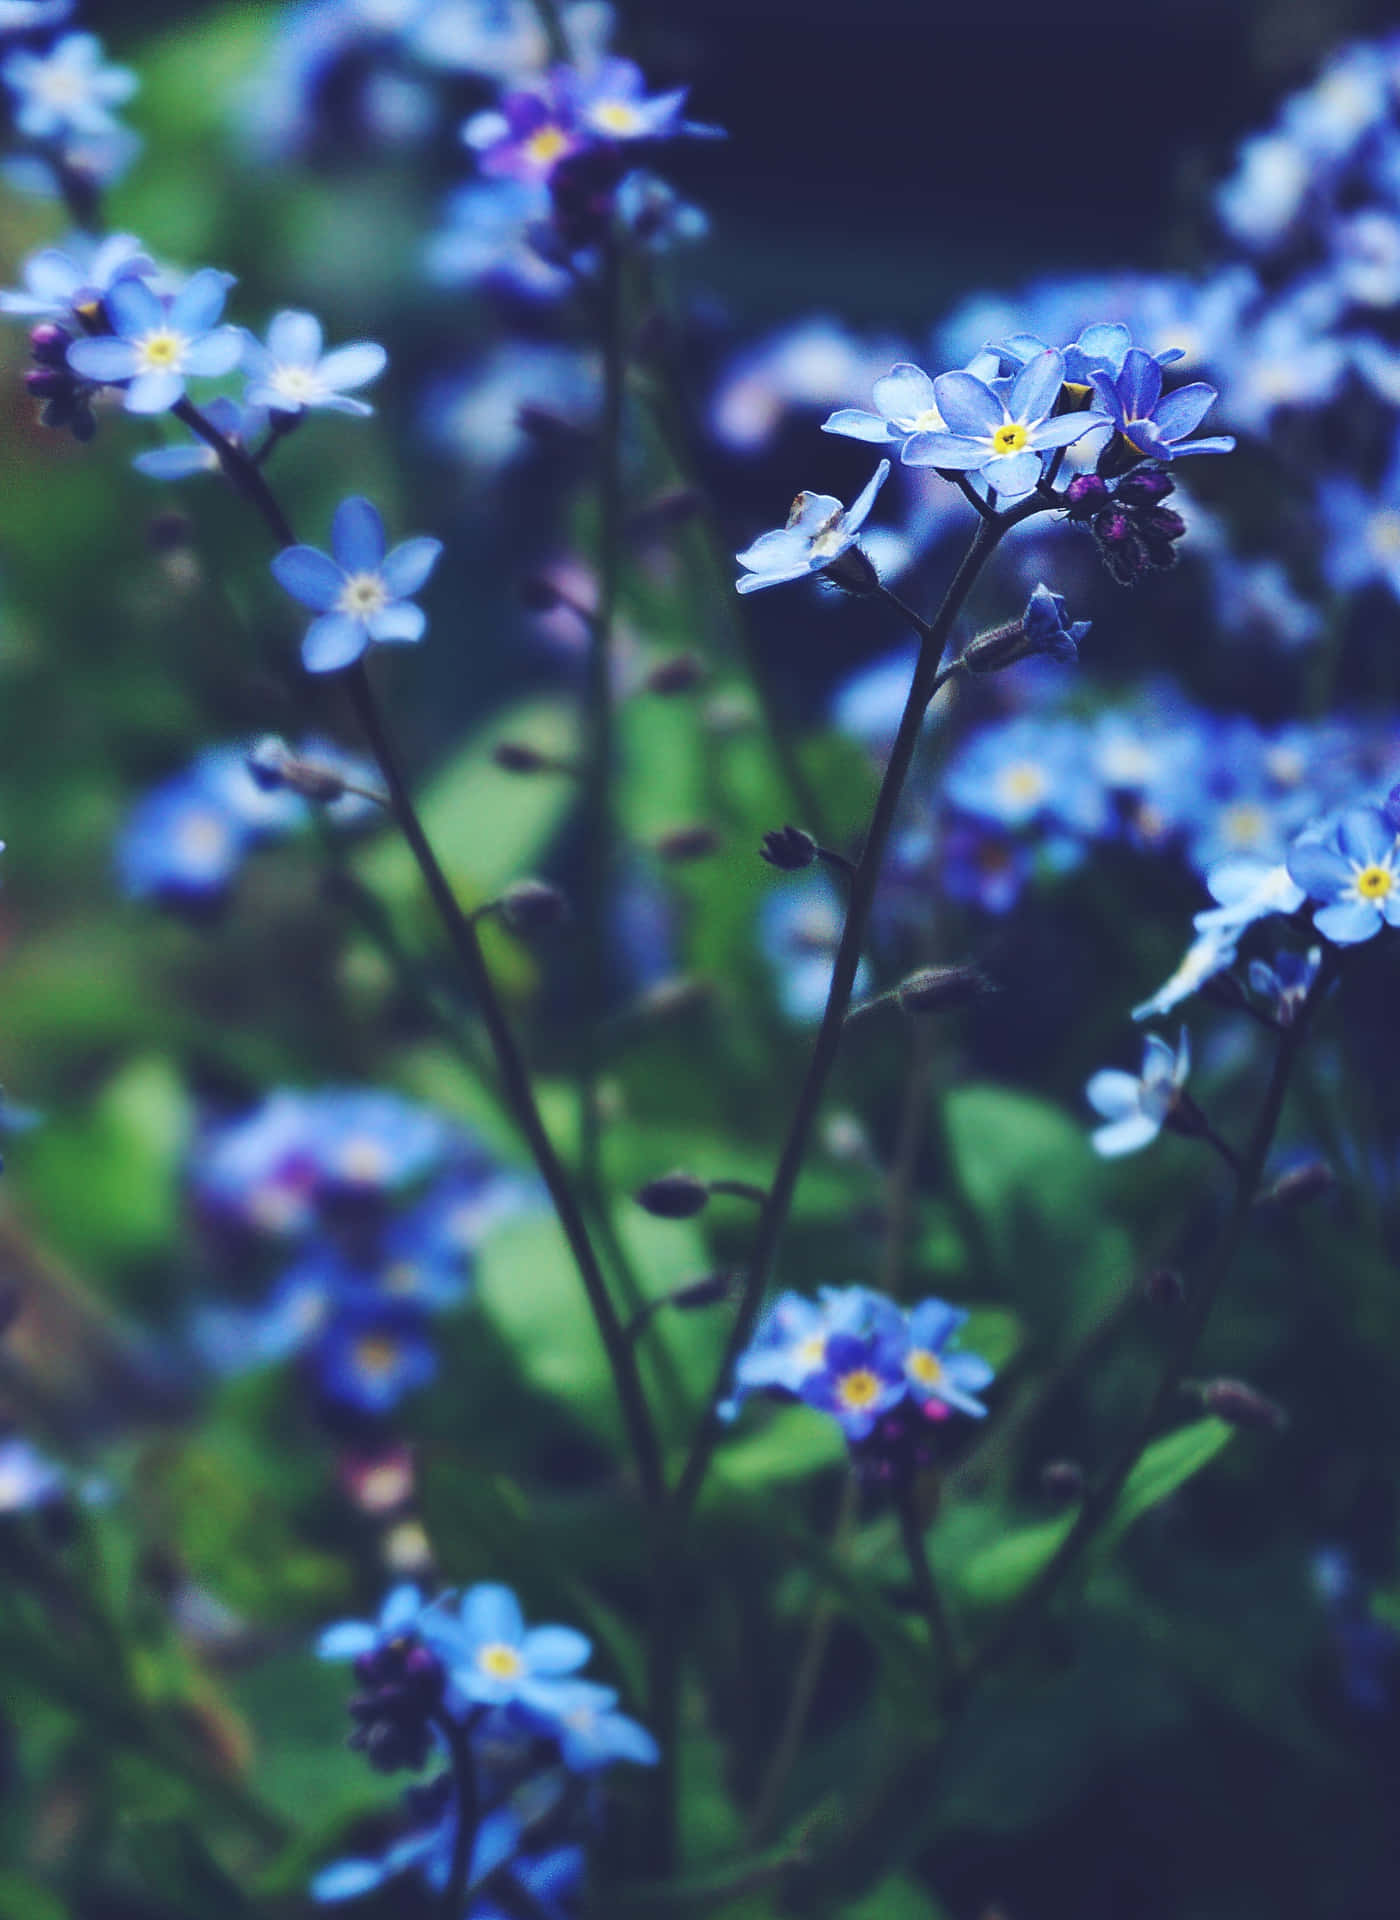 A Close Up Of Blue Flowers In The Garden